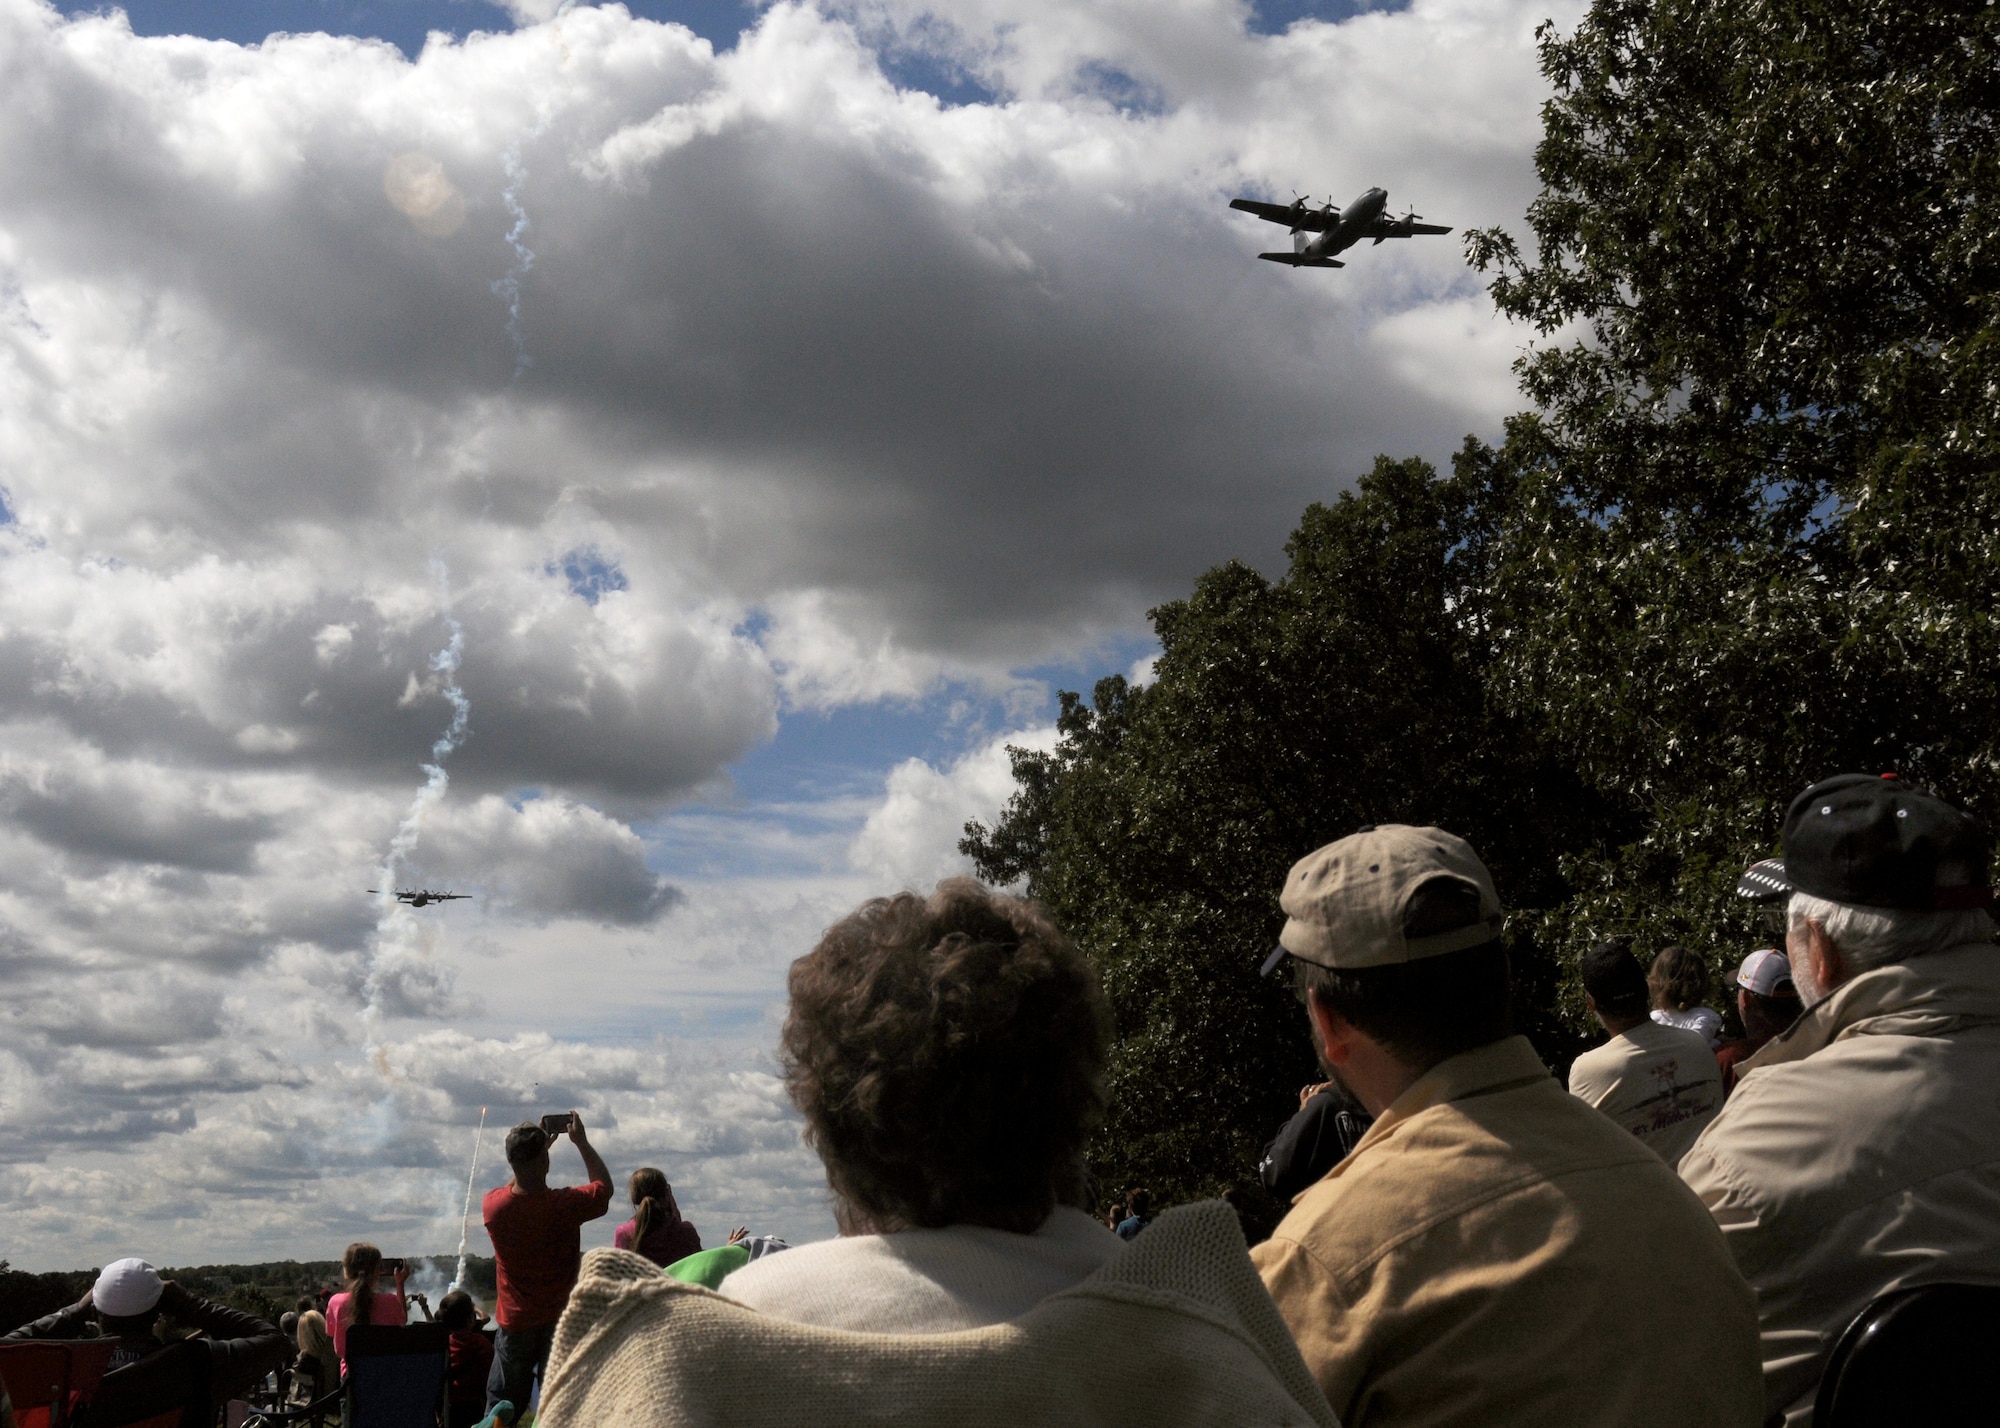 Central Missouri community members watch as C-130 aircraft of the 139th Airlift Wing fly over an outreach event hosted by the Missouri Air National Guard’s 131st Bomb Wing, Detachment 1 - Cannon Range, near Laquey, Missouri, Sept. 12, 2015.  More than 850 guests participated in the family-friendly event that included munitions demonstrations by the B-2 Spirit stealth bomber, A-10 Thunderbolt II attack aircraft, and C-130 Hercules transport. (U.S. Air National Guard photo by Senior Airman Nathan Dampf)

